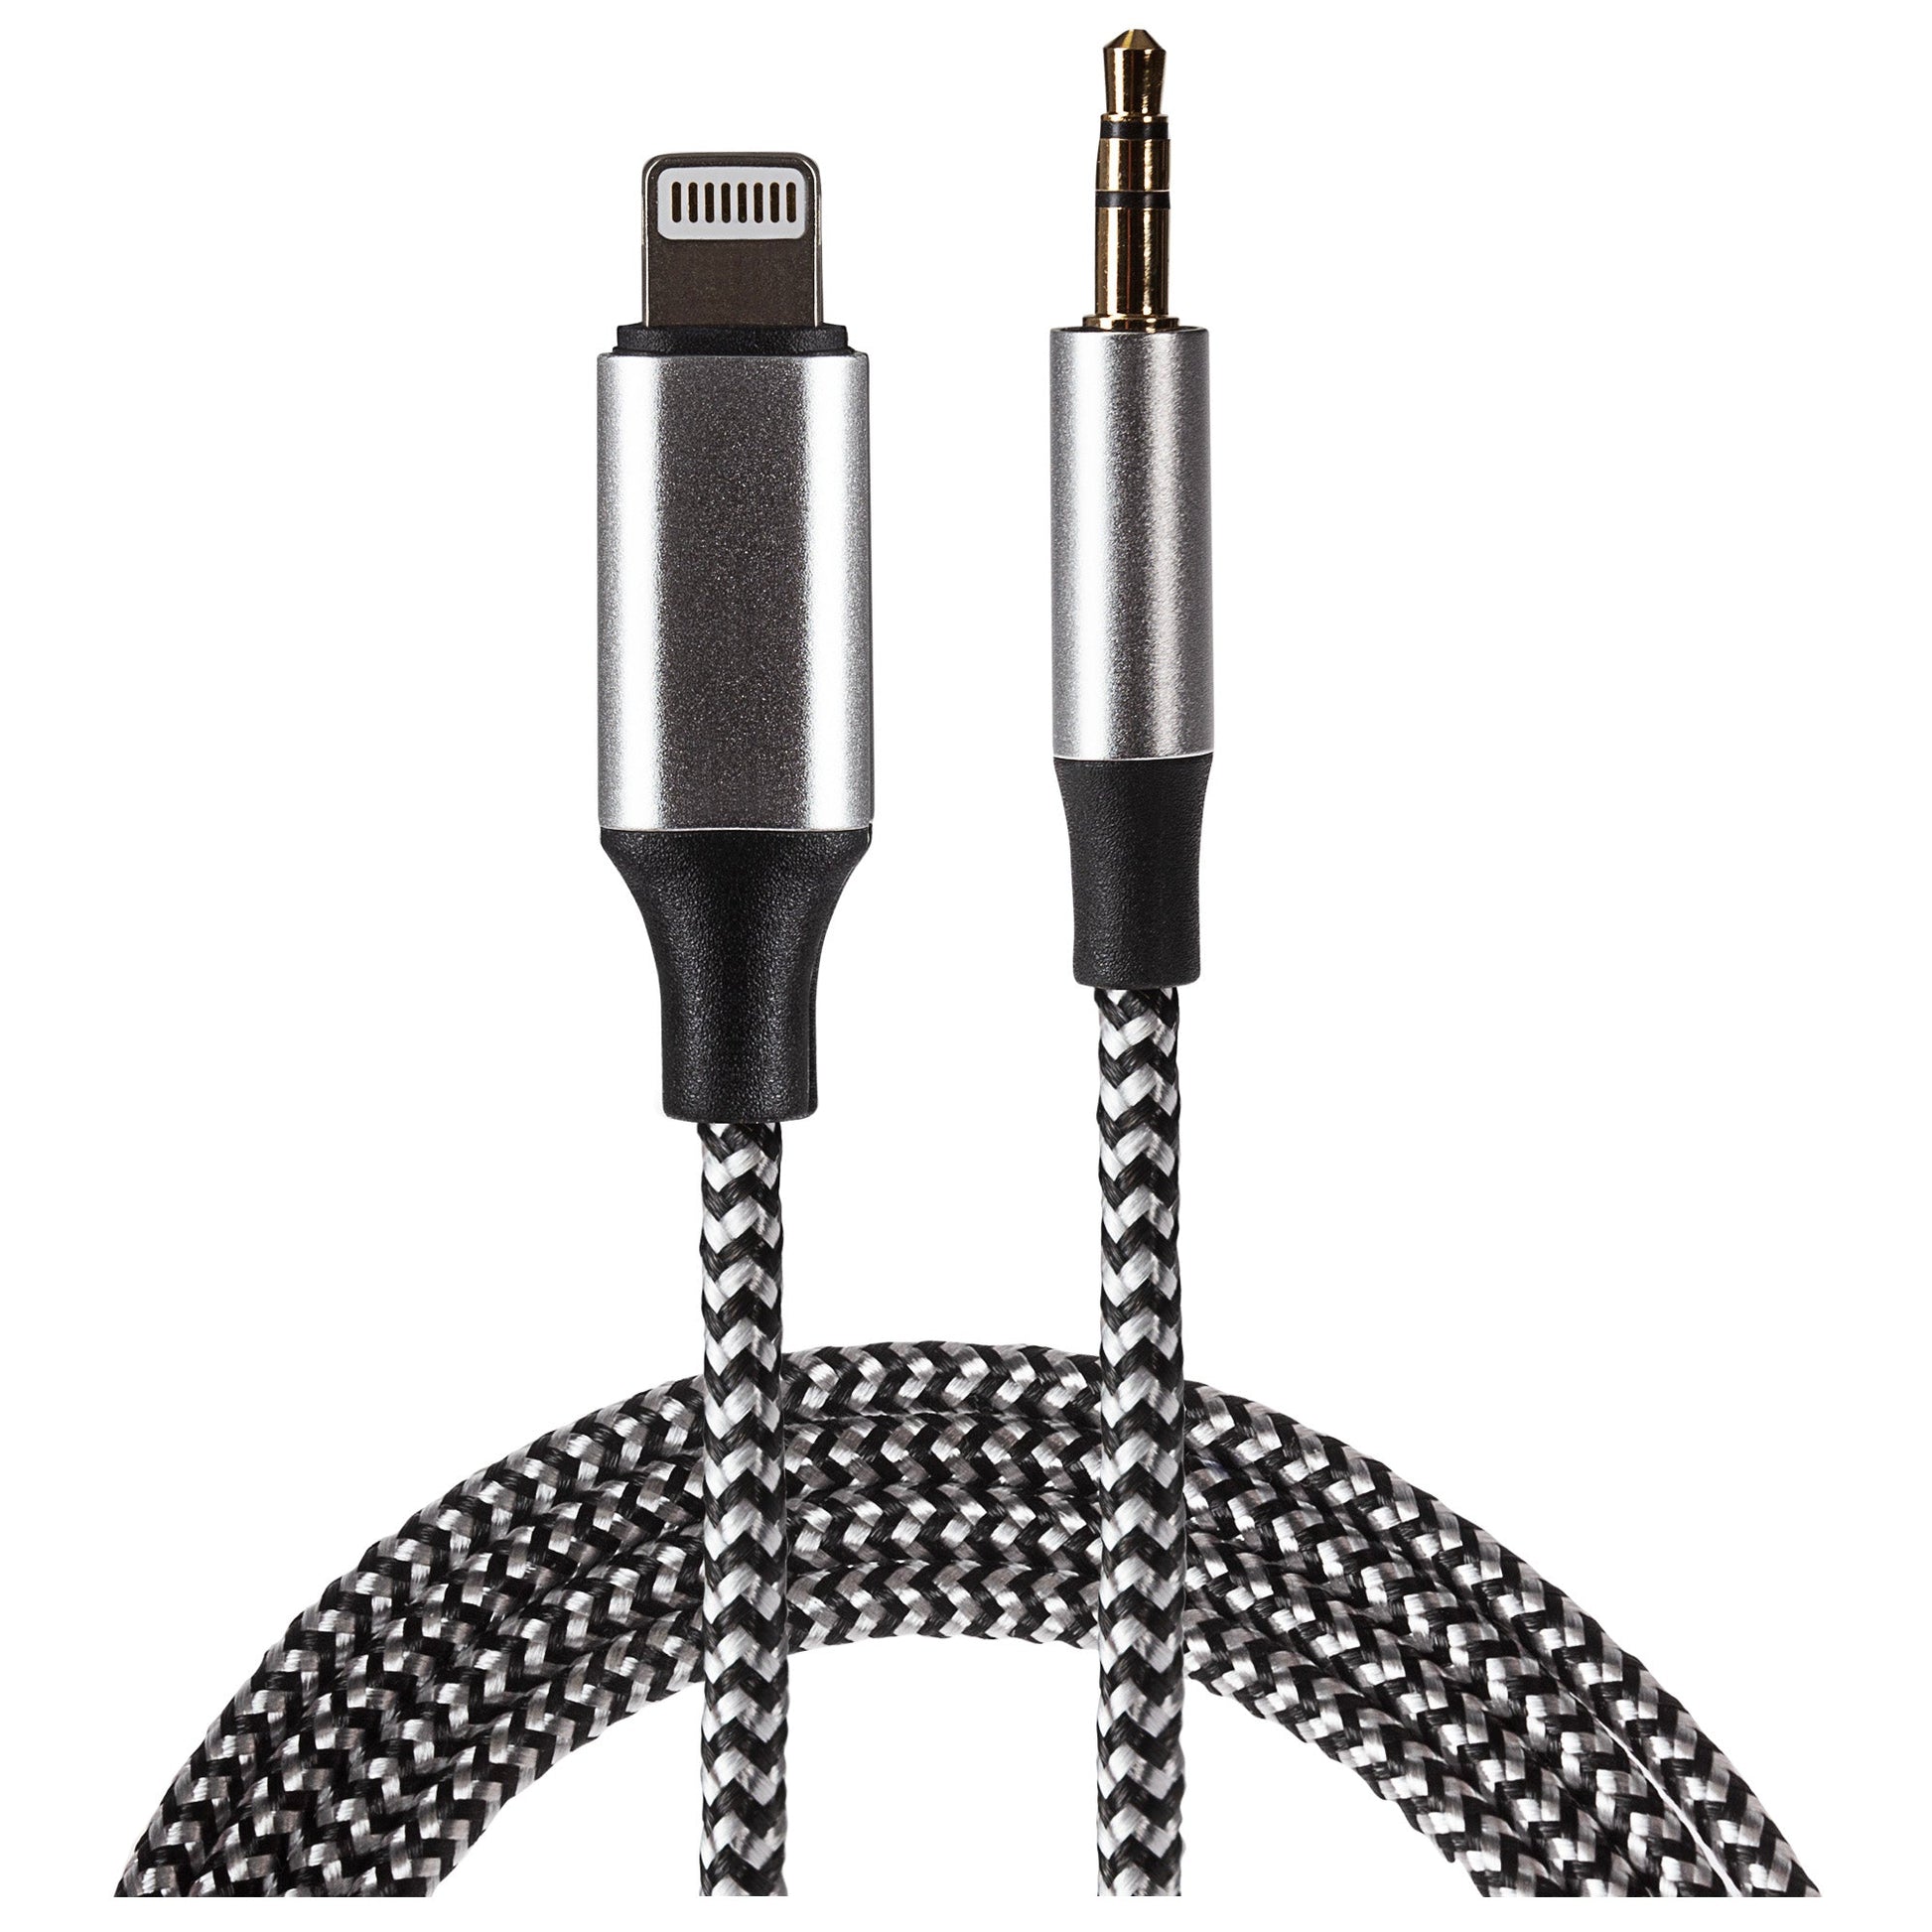 Maplin Lightning to 3.5mm Aux Stereo 3 Pole Jack Plug Braided Cable - Silver, 1m - maplin.co.uk